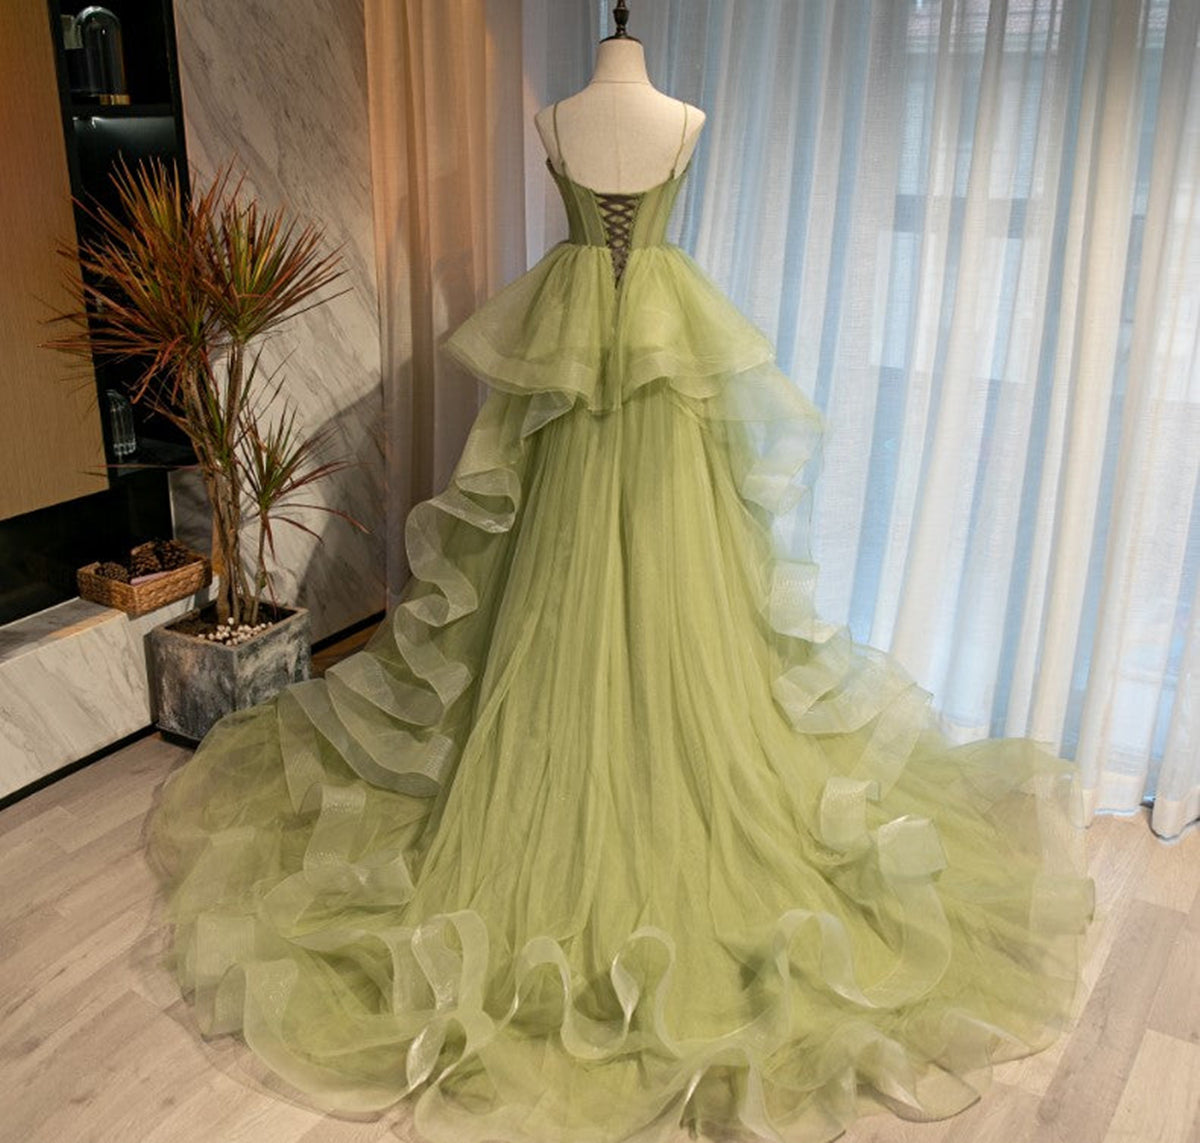 Party Dresses Ideas, Sweetheart Neck Green Tulle Long Prom Dresses, Green Tulle Long Formal Graduation Dresses